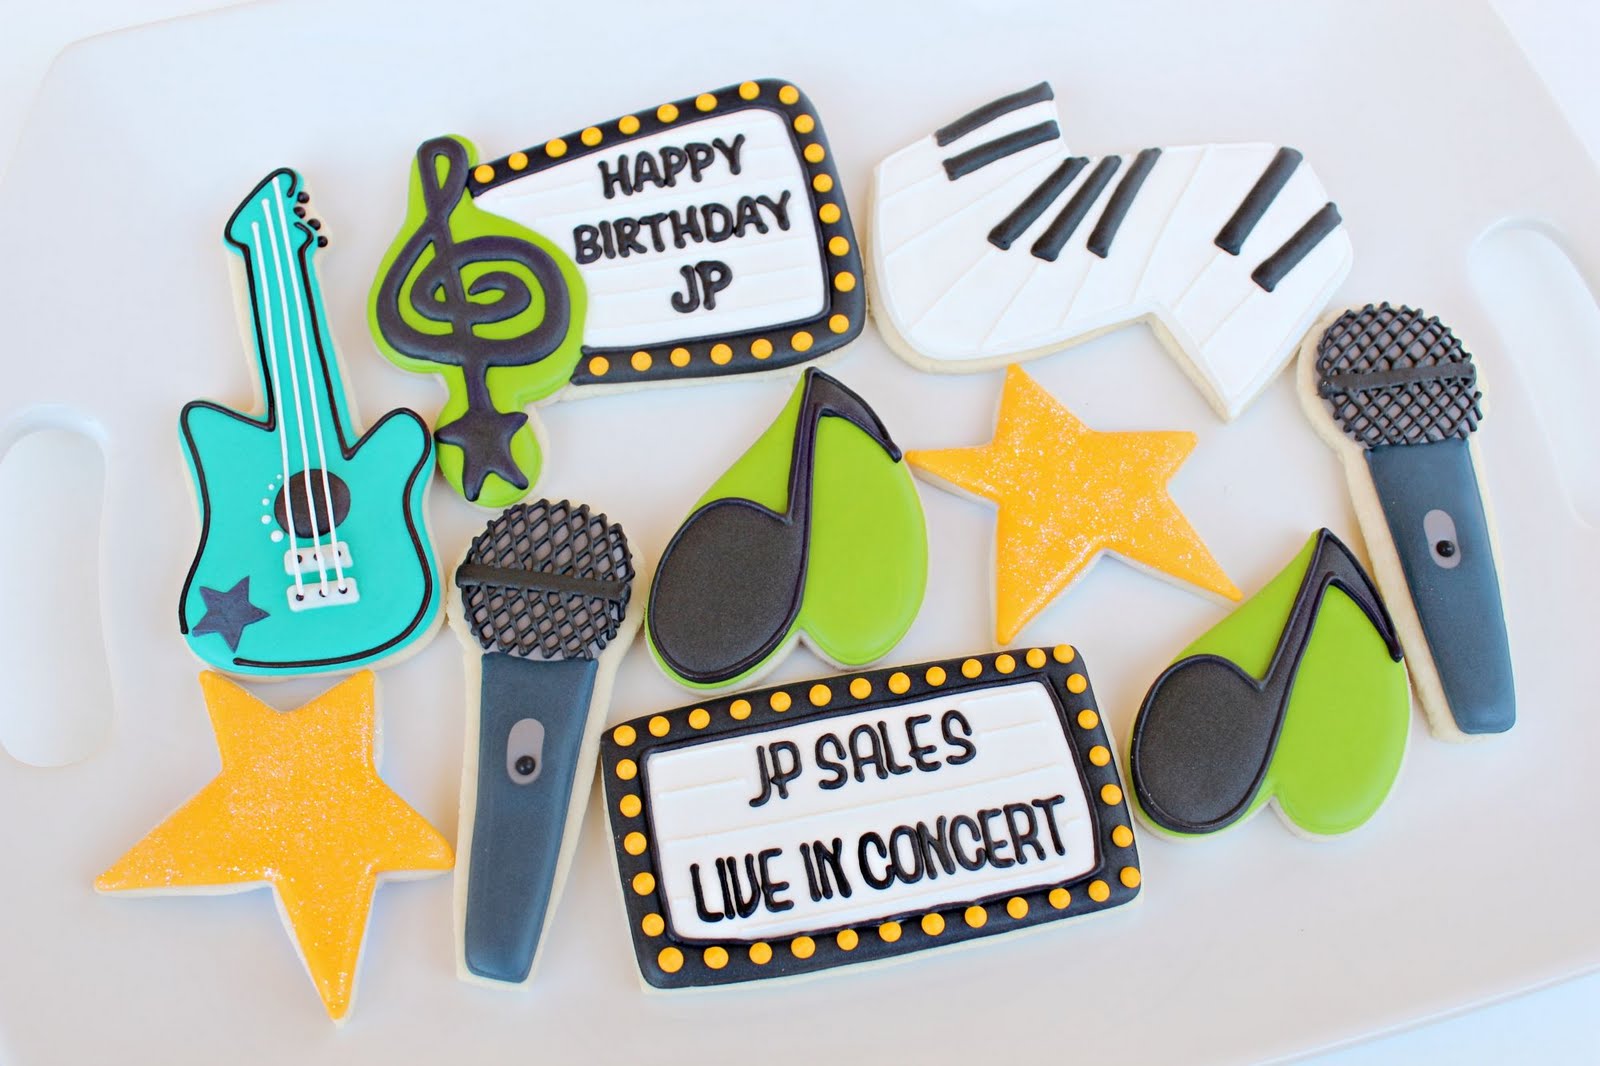 Making Cookies From Paper Templates - The Sweet Adventures of